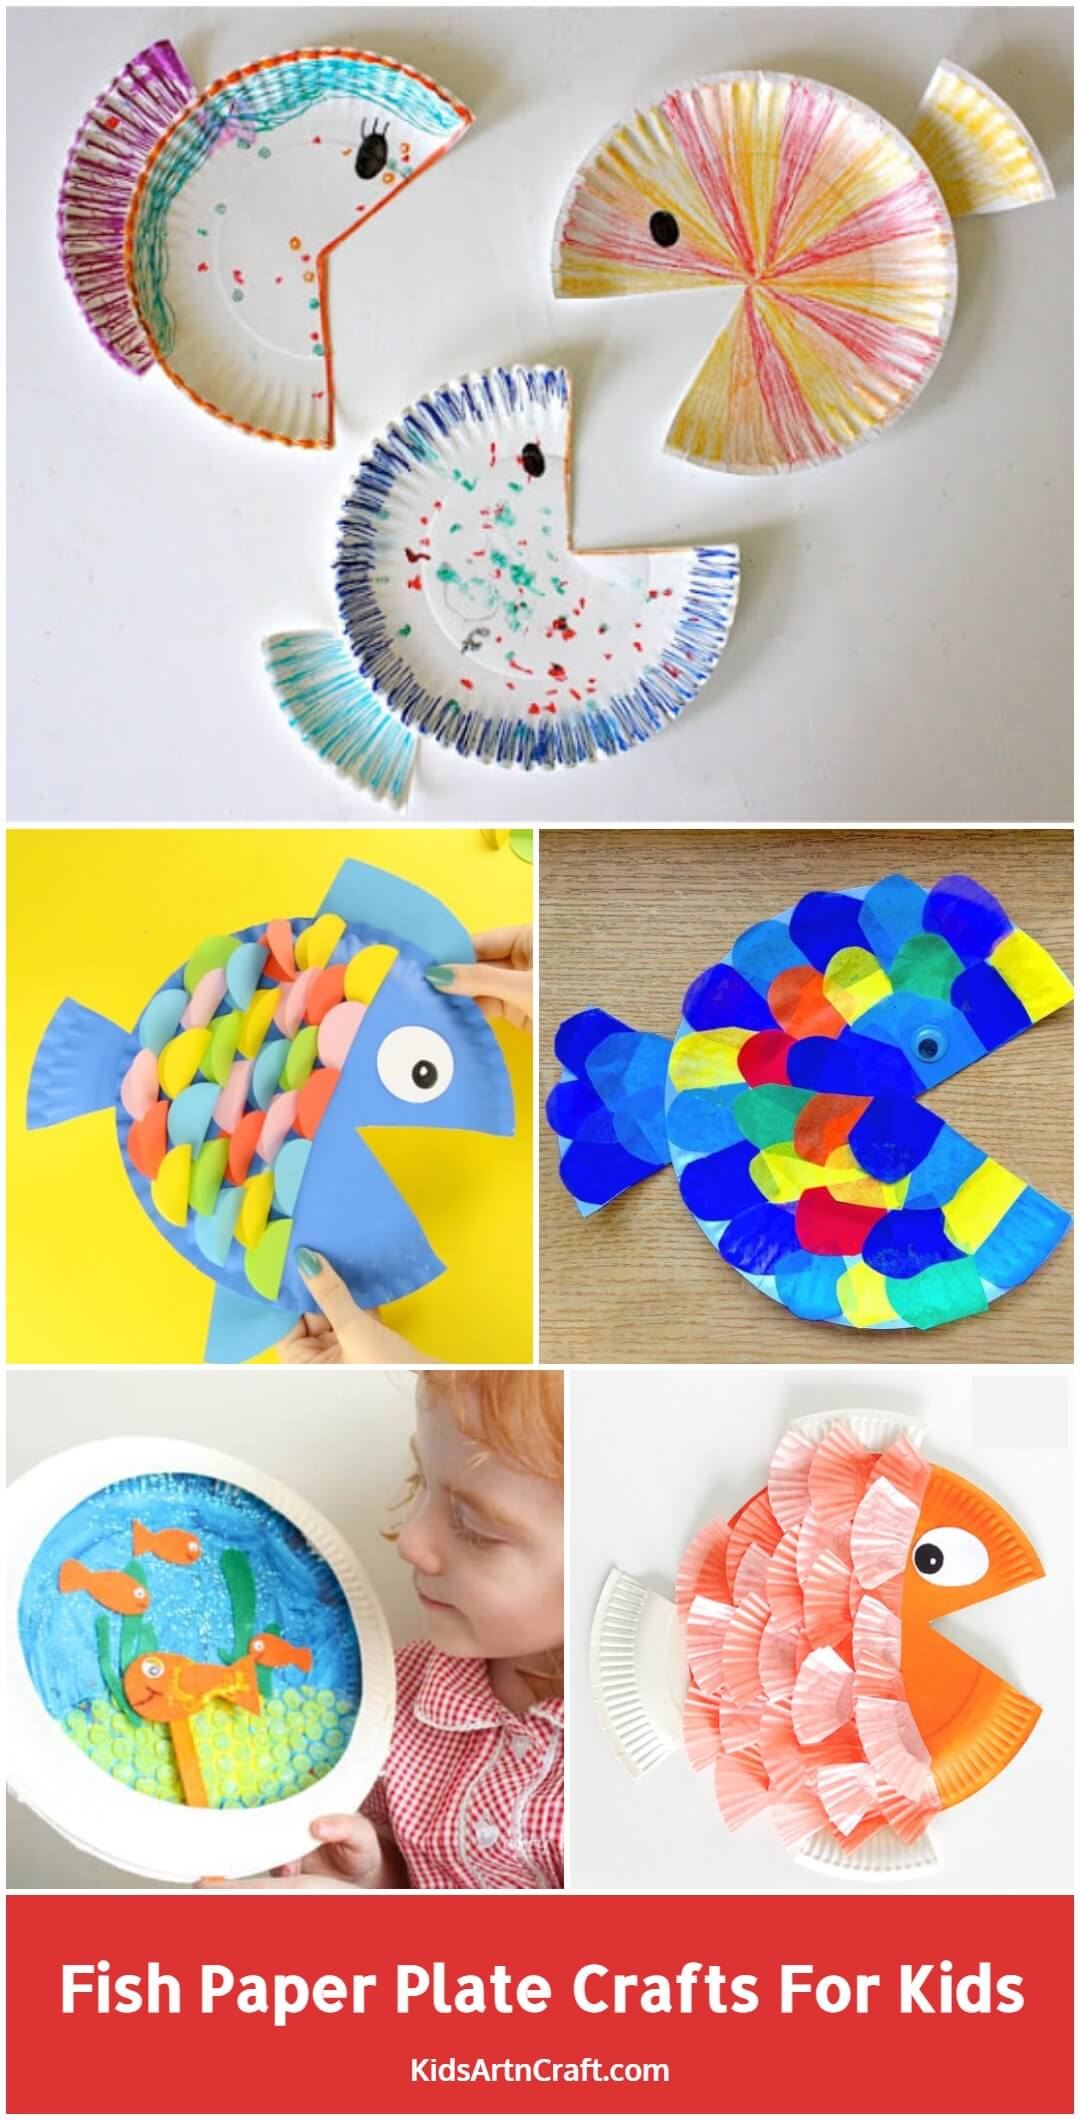 Fish Paper Plate Crafts For Kids